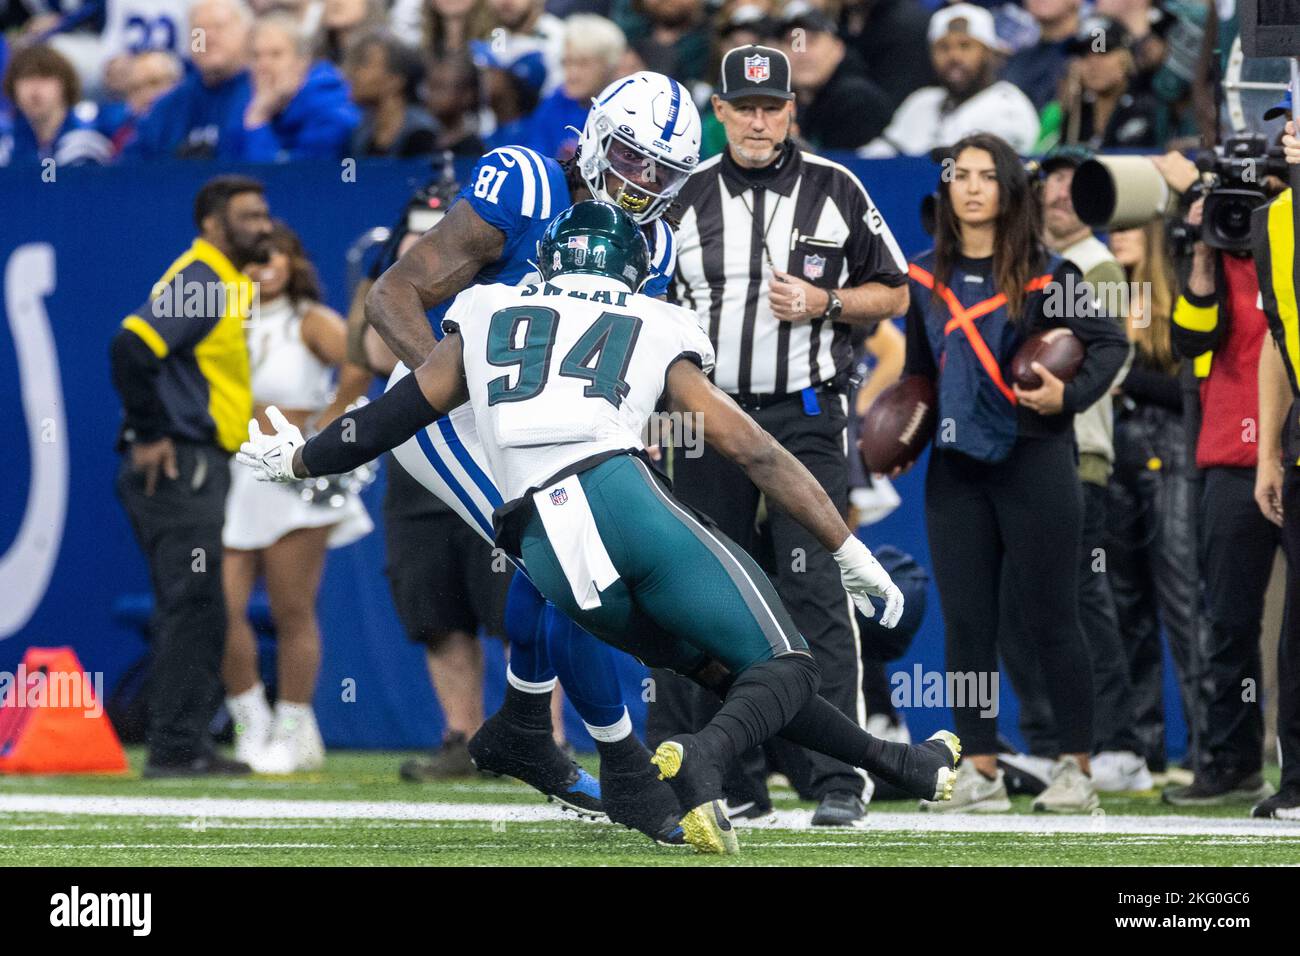 Indianapolis, Indiana, USA. 20th Nov, 2022. Indianapolis Colts tight end Mo Alie-Cox (81) runs with the ball as Philadelphia Eagles defensive lineman Josh Sweat (94) pursues during NFL game in Indianapolis, Indiana. John Mersits/CSM/Alamy Live News Stock Photo